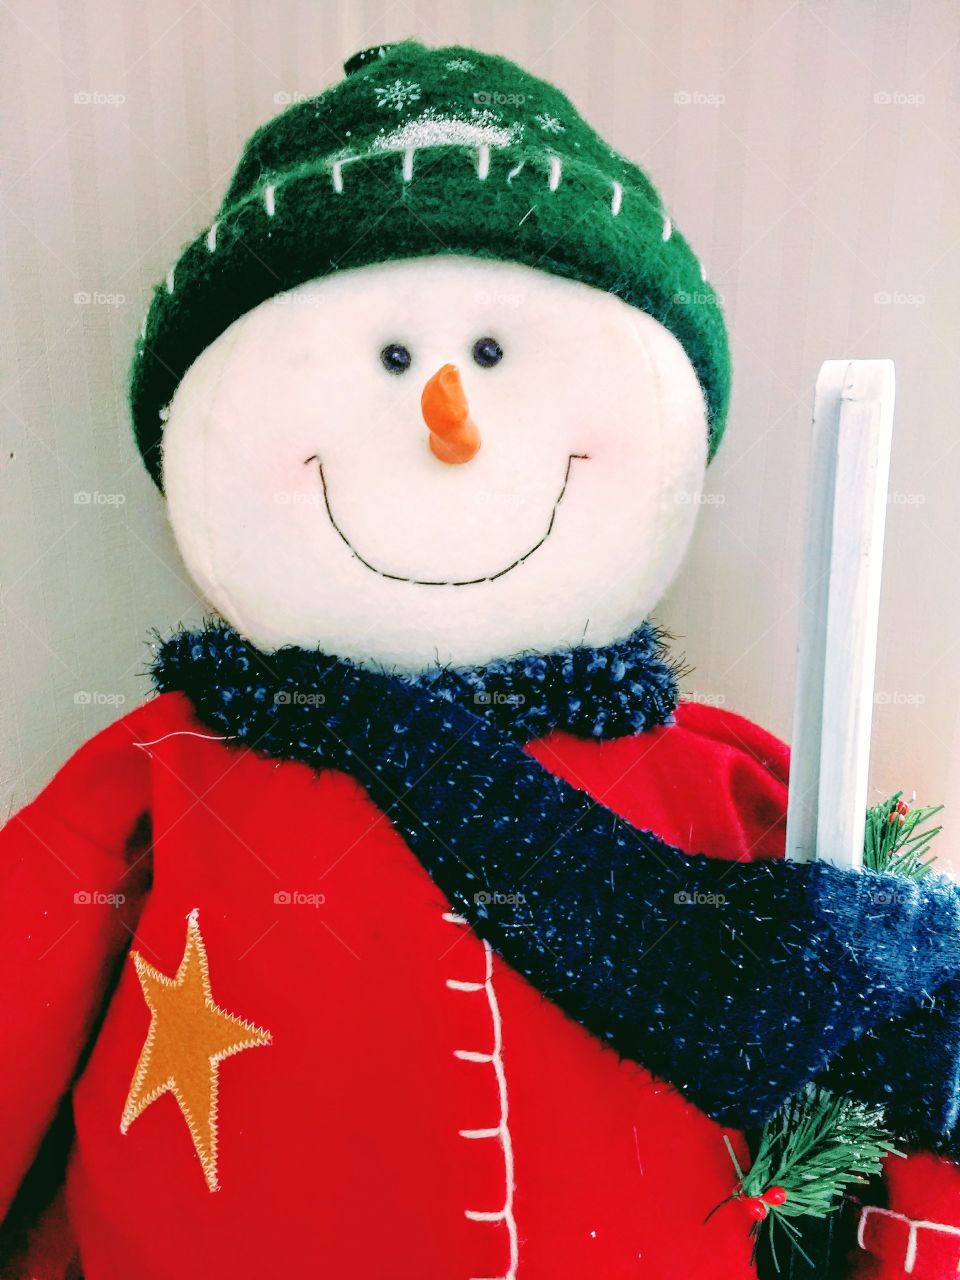 A snowman in a red jacket and green knit hat